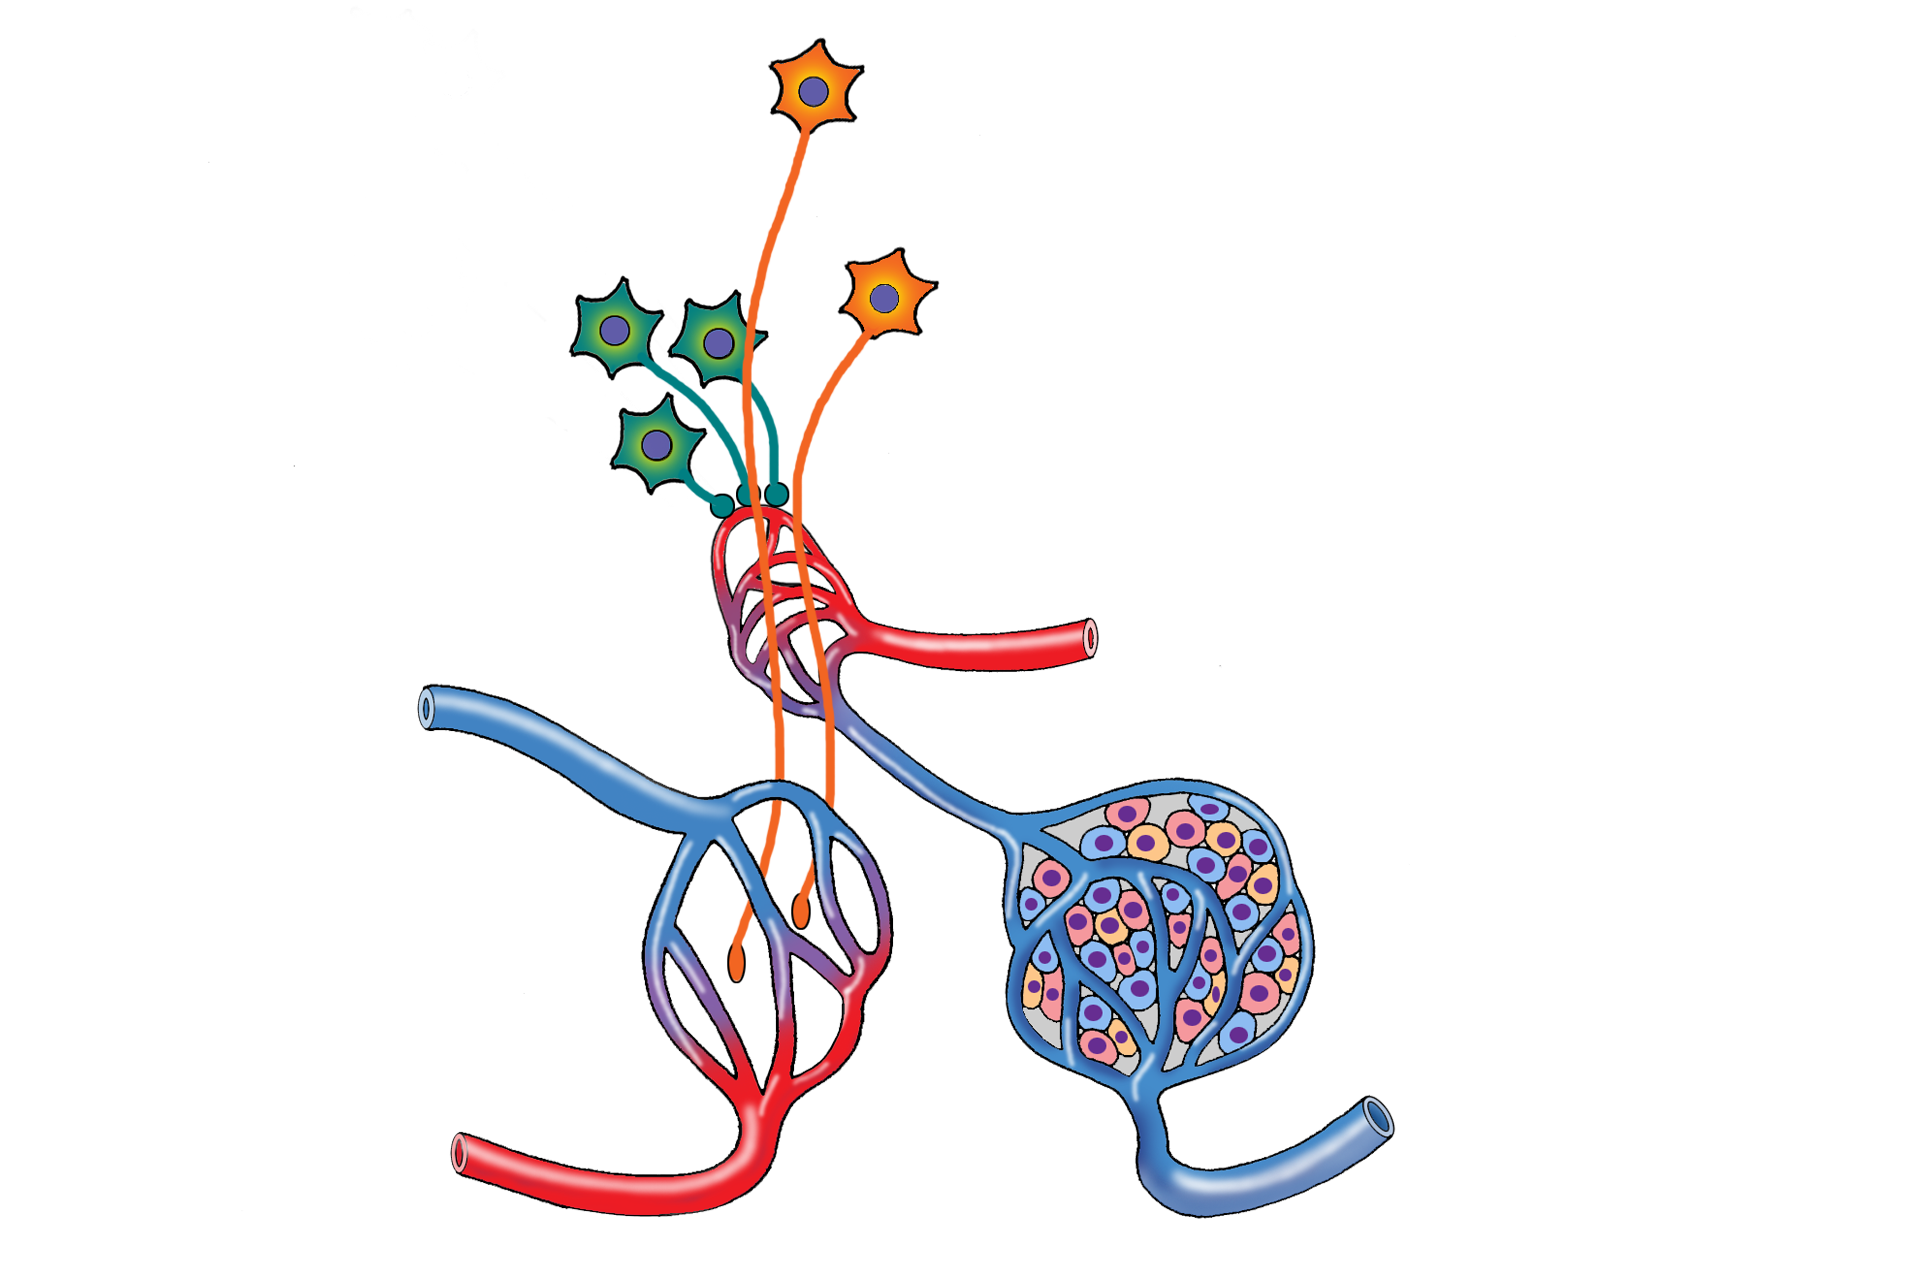 Combined secretion and control > <p>This composite image compares the structural and functional components of the neuro- and adenohypophyseal subdivisions, as well as their controlling mechanisms.</p>
